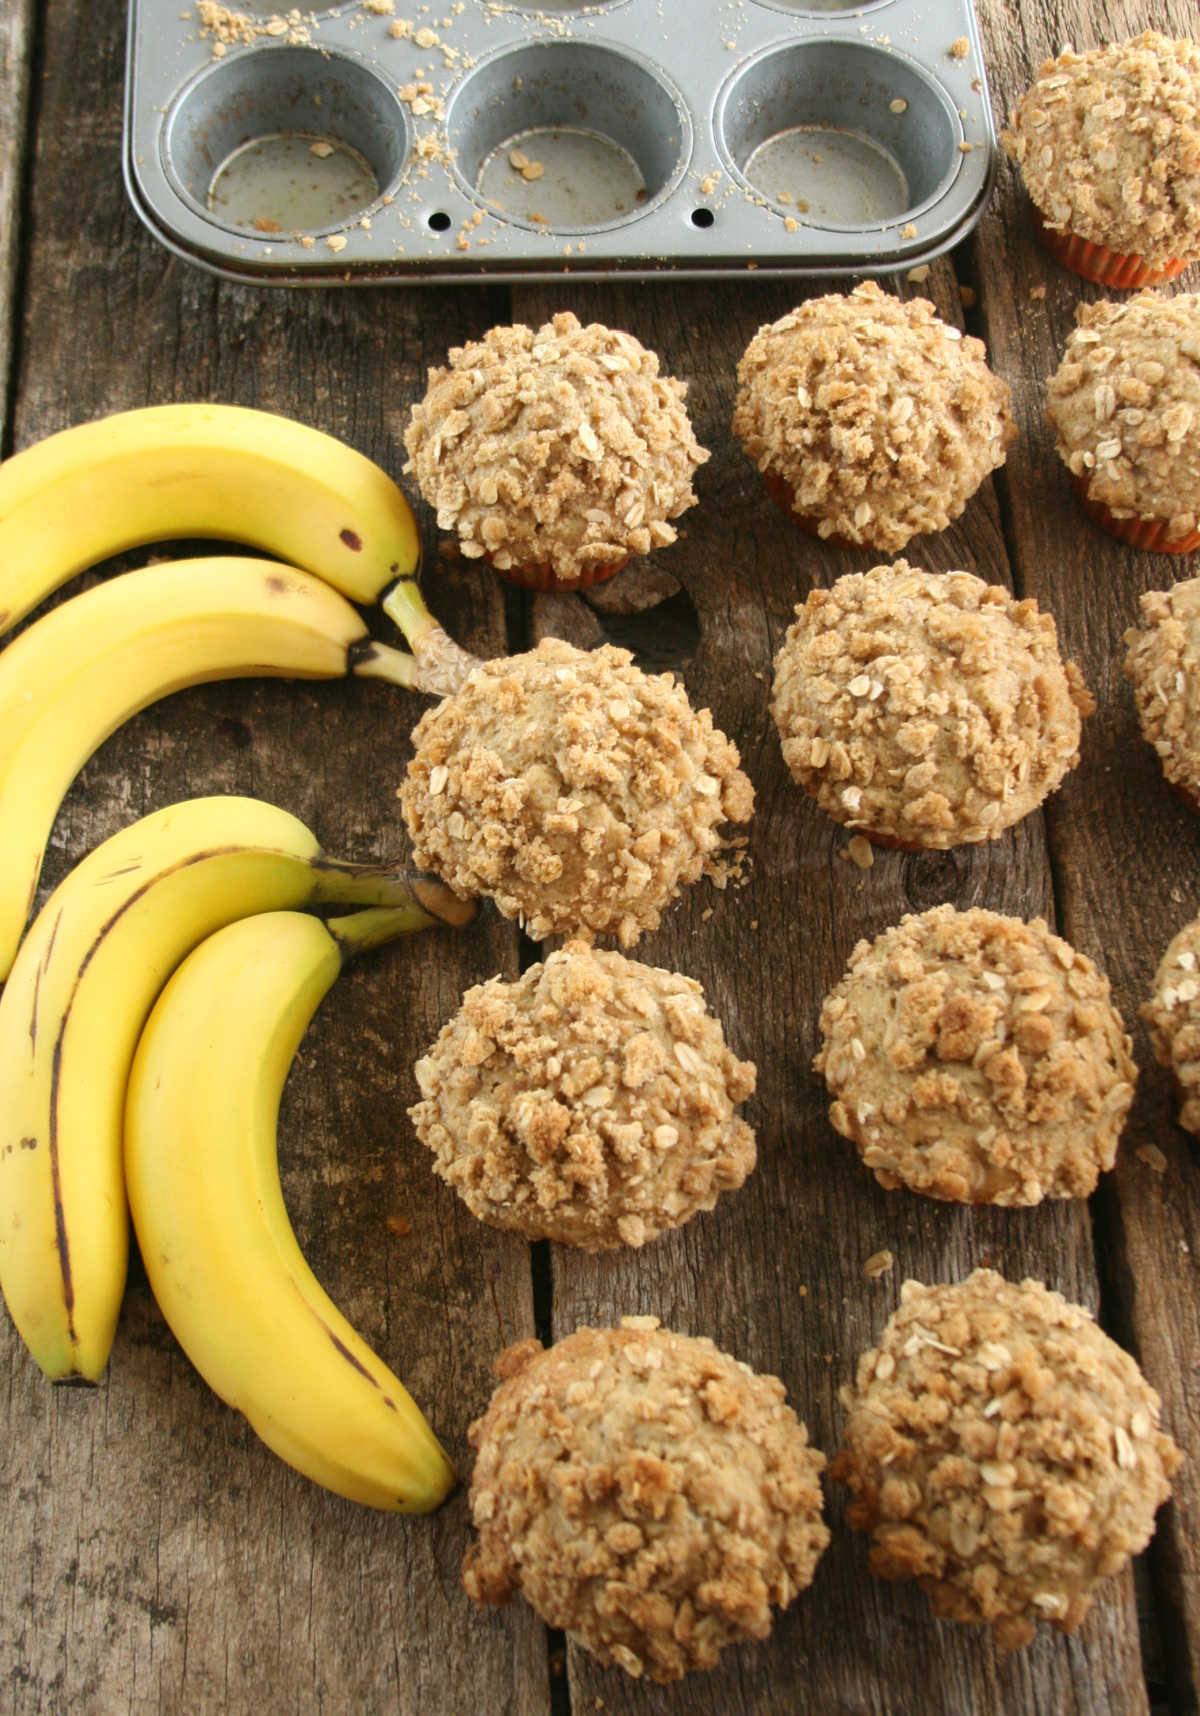 Banana muffins with crumb topping on reclaimed boards, muffin tin behind, ripe bananas to side.